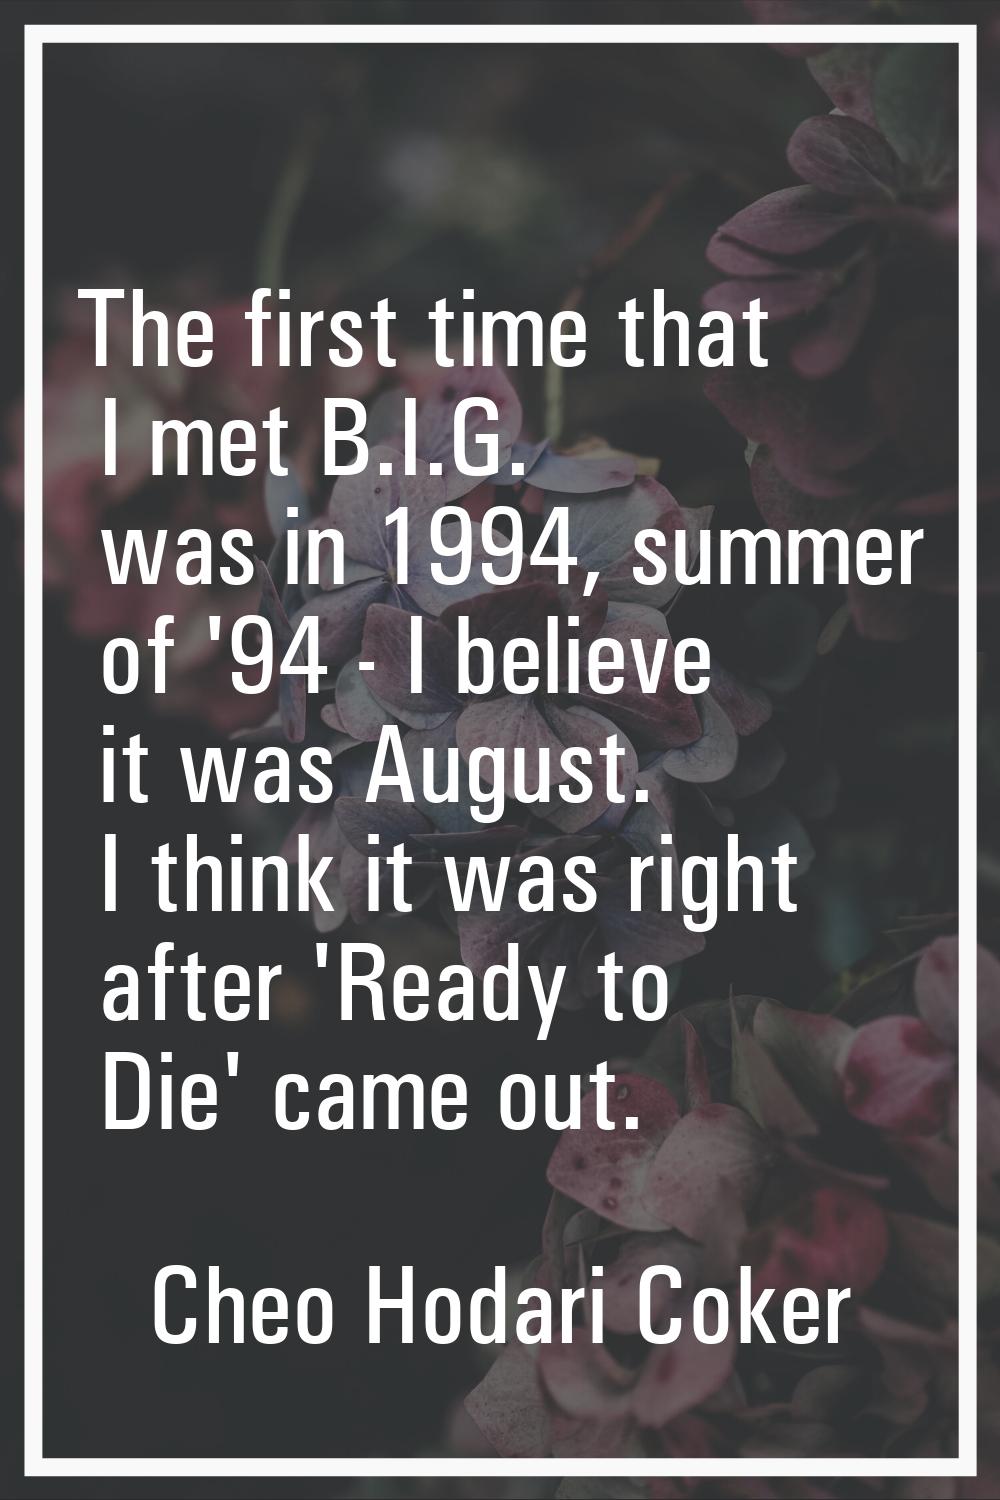 The first time that I met B.I.G. was in 1994, summer of '94 - I believe it was August. I think it w